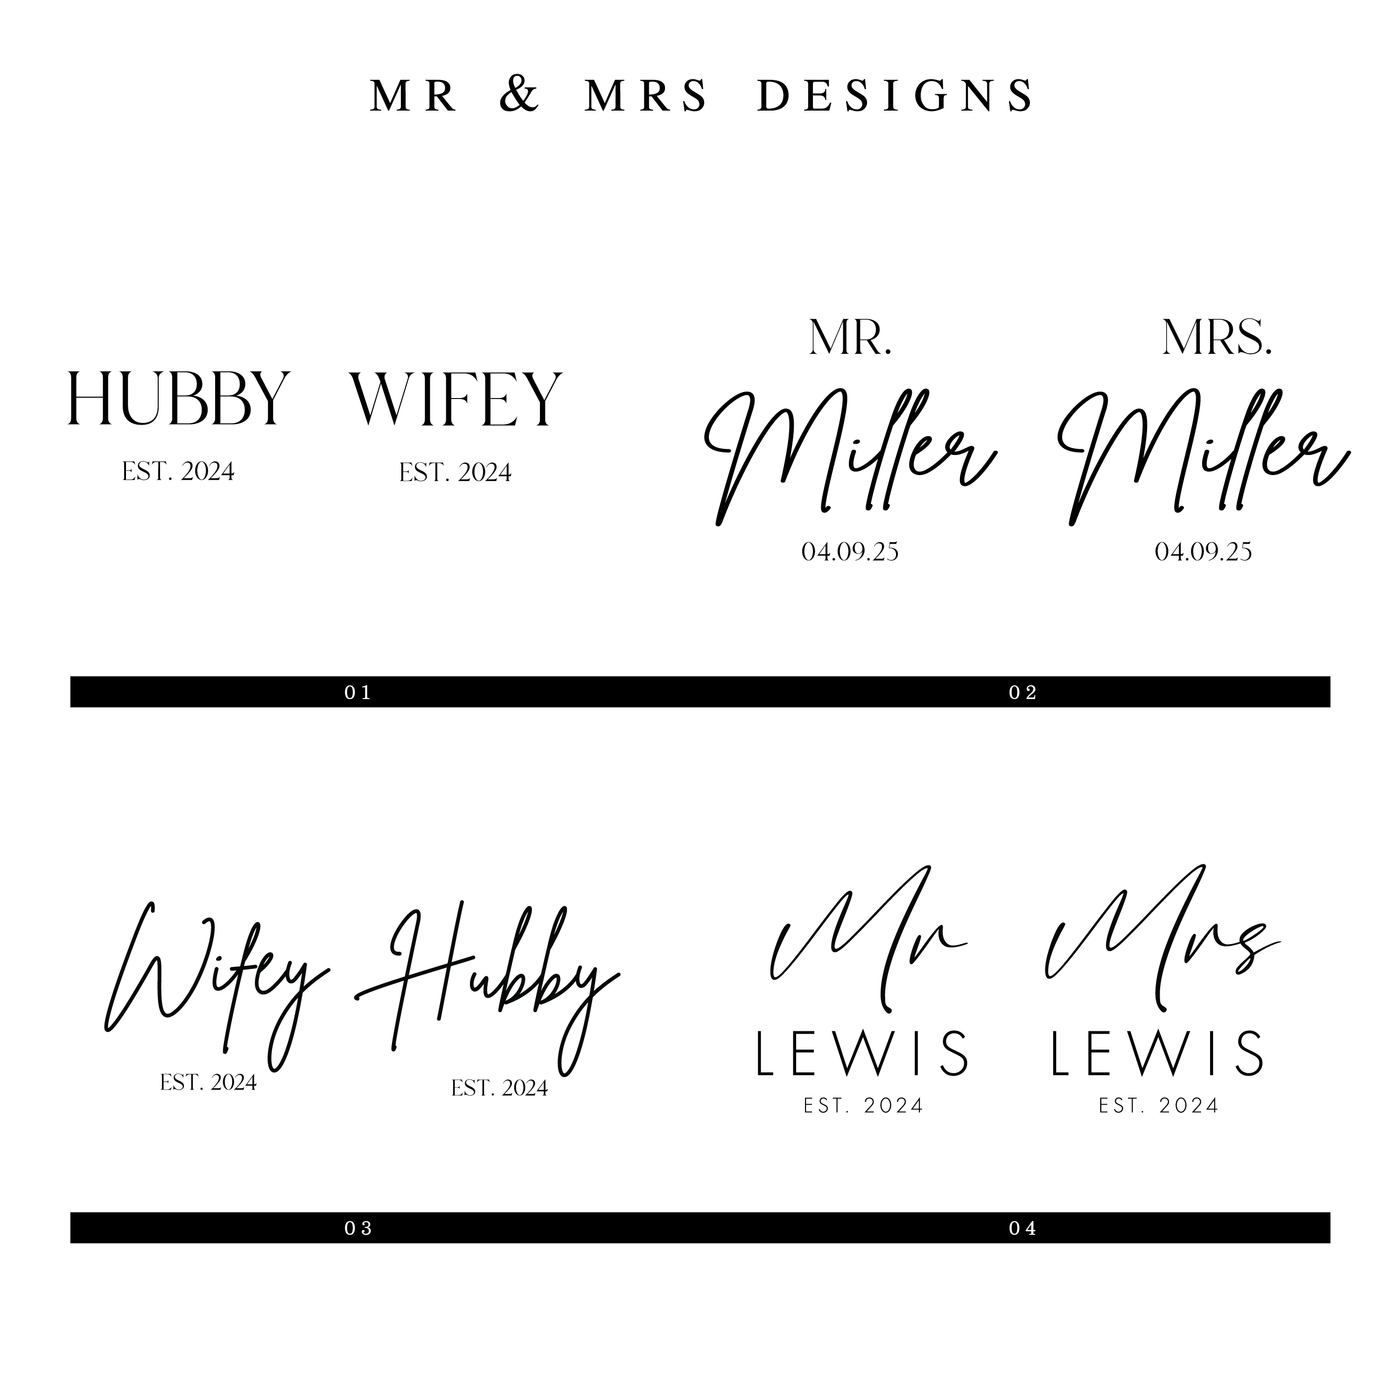 Personalized Mr and Mrs Tumbler Gift Set - Barn Street Designs